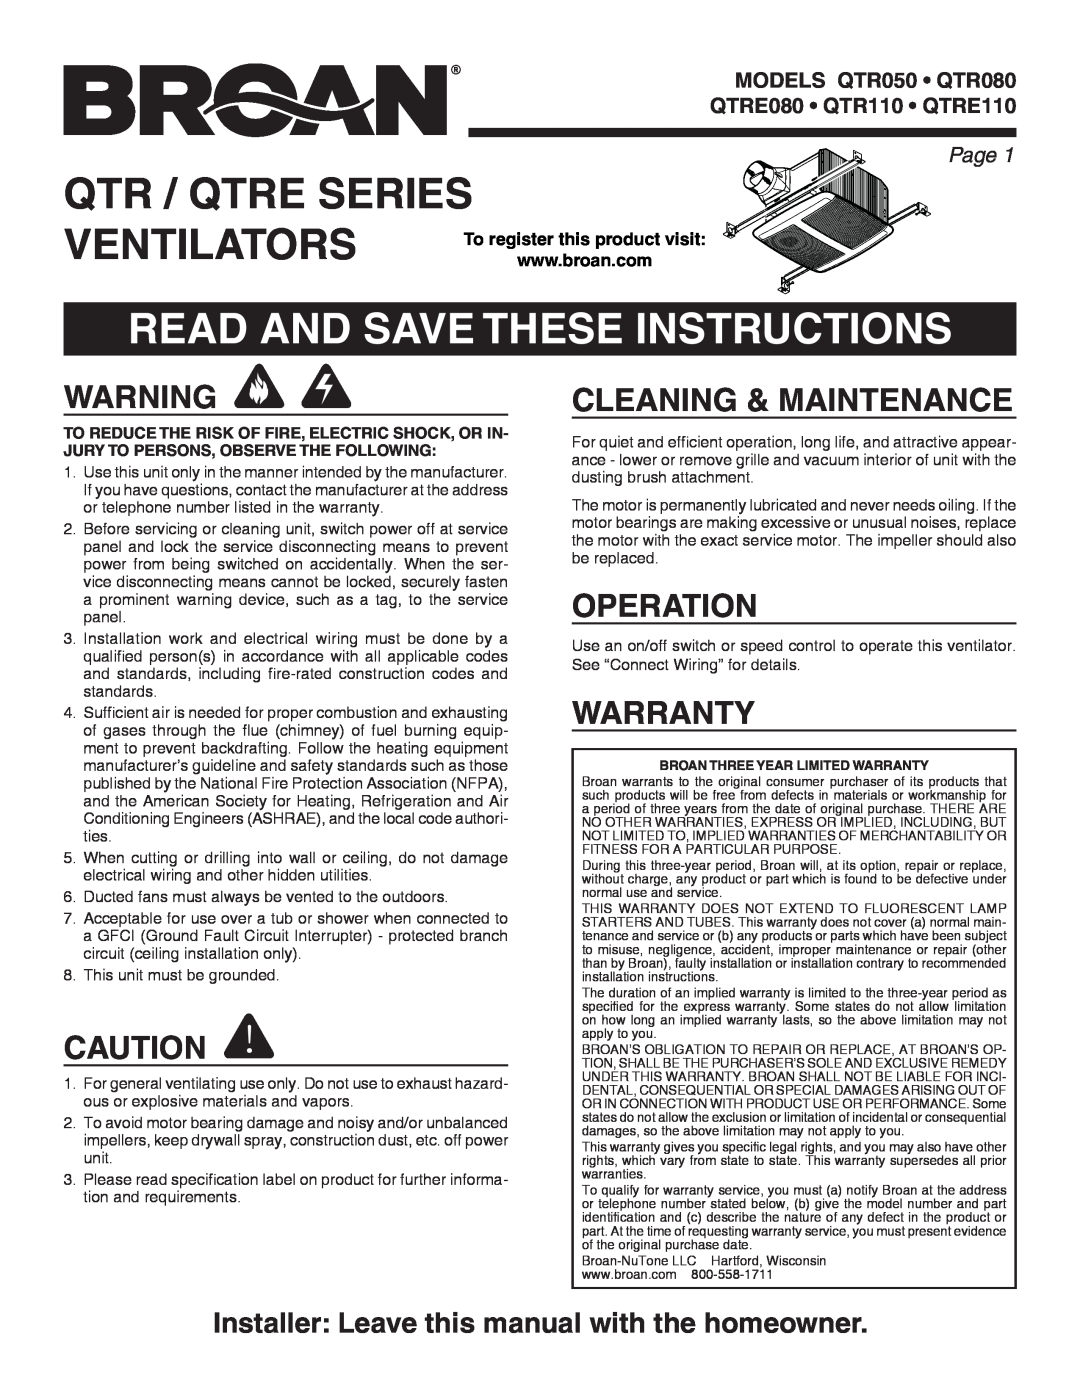 Broan QTR050 warranty Qtr / Qtre Series, Read And Save These Instructions, Cleaning & Maintenance, Operation, Warranty 